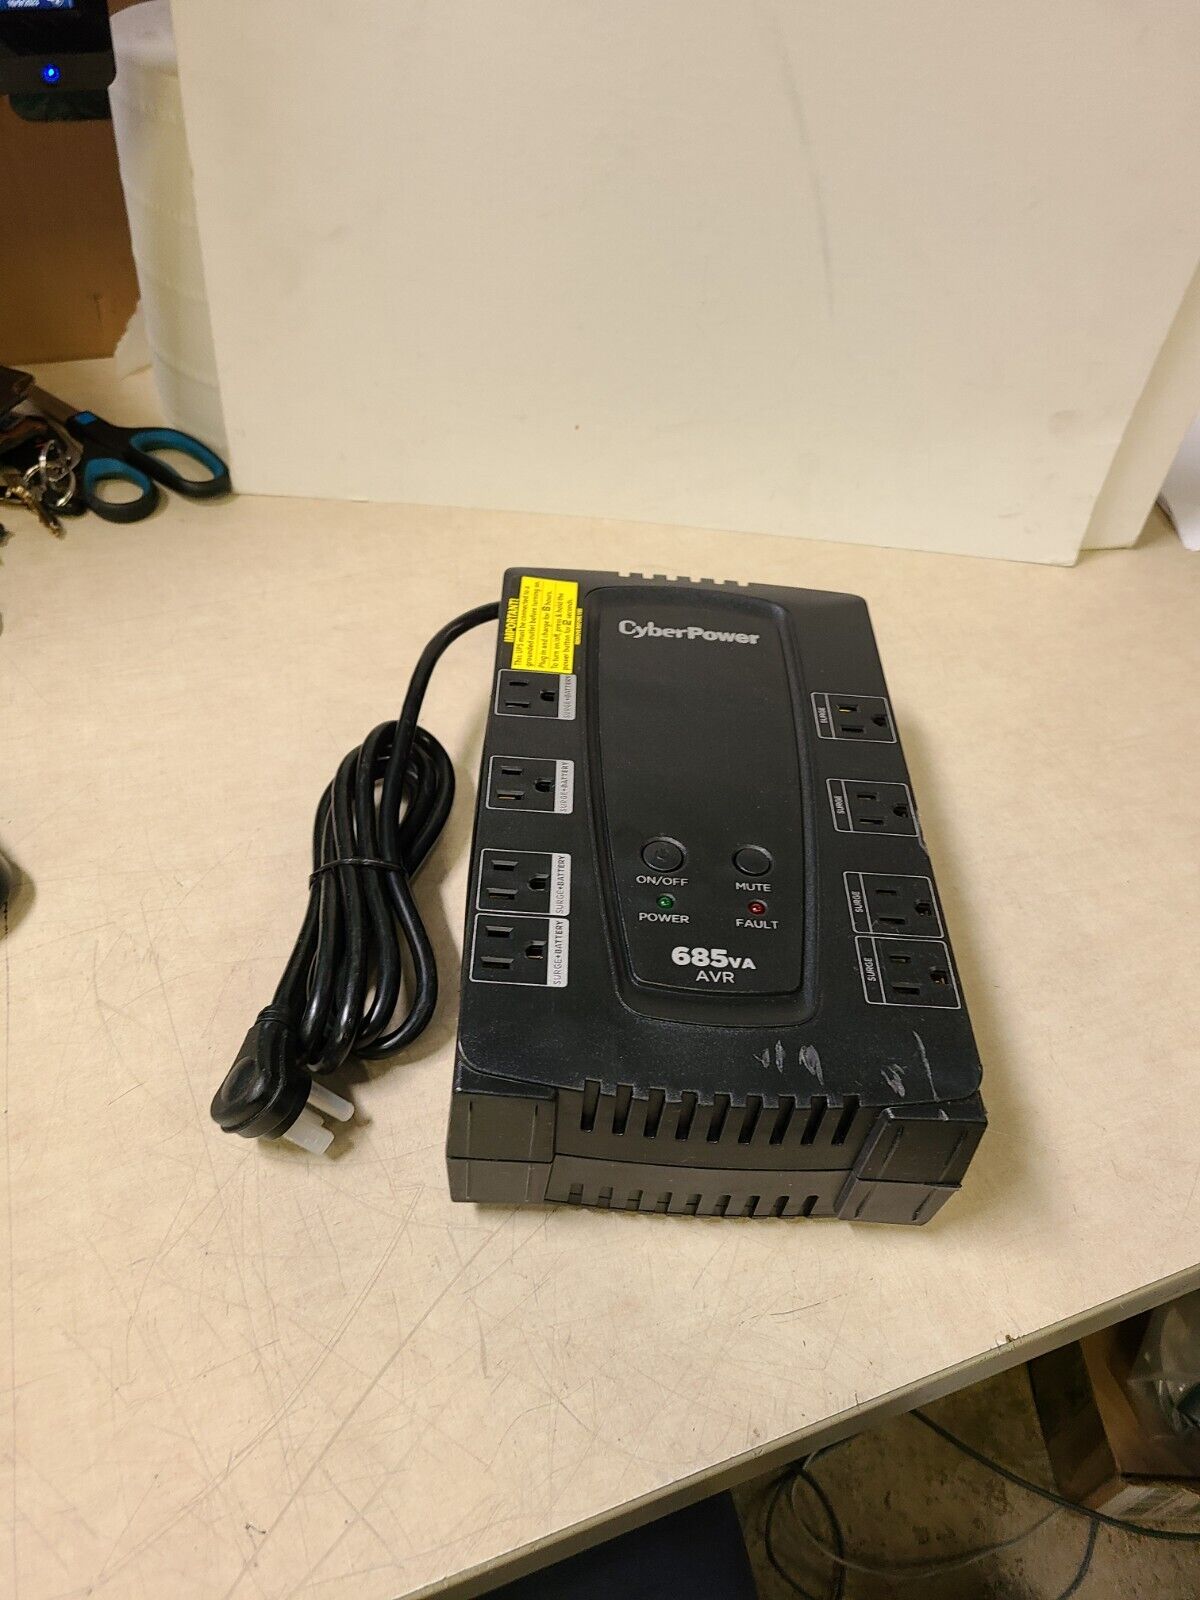 CyberPower 685VA Compact AVR UPS System, 390W, 8 Outlet - (CP685AVRa)